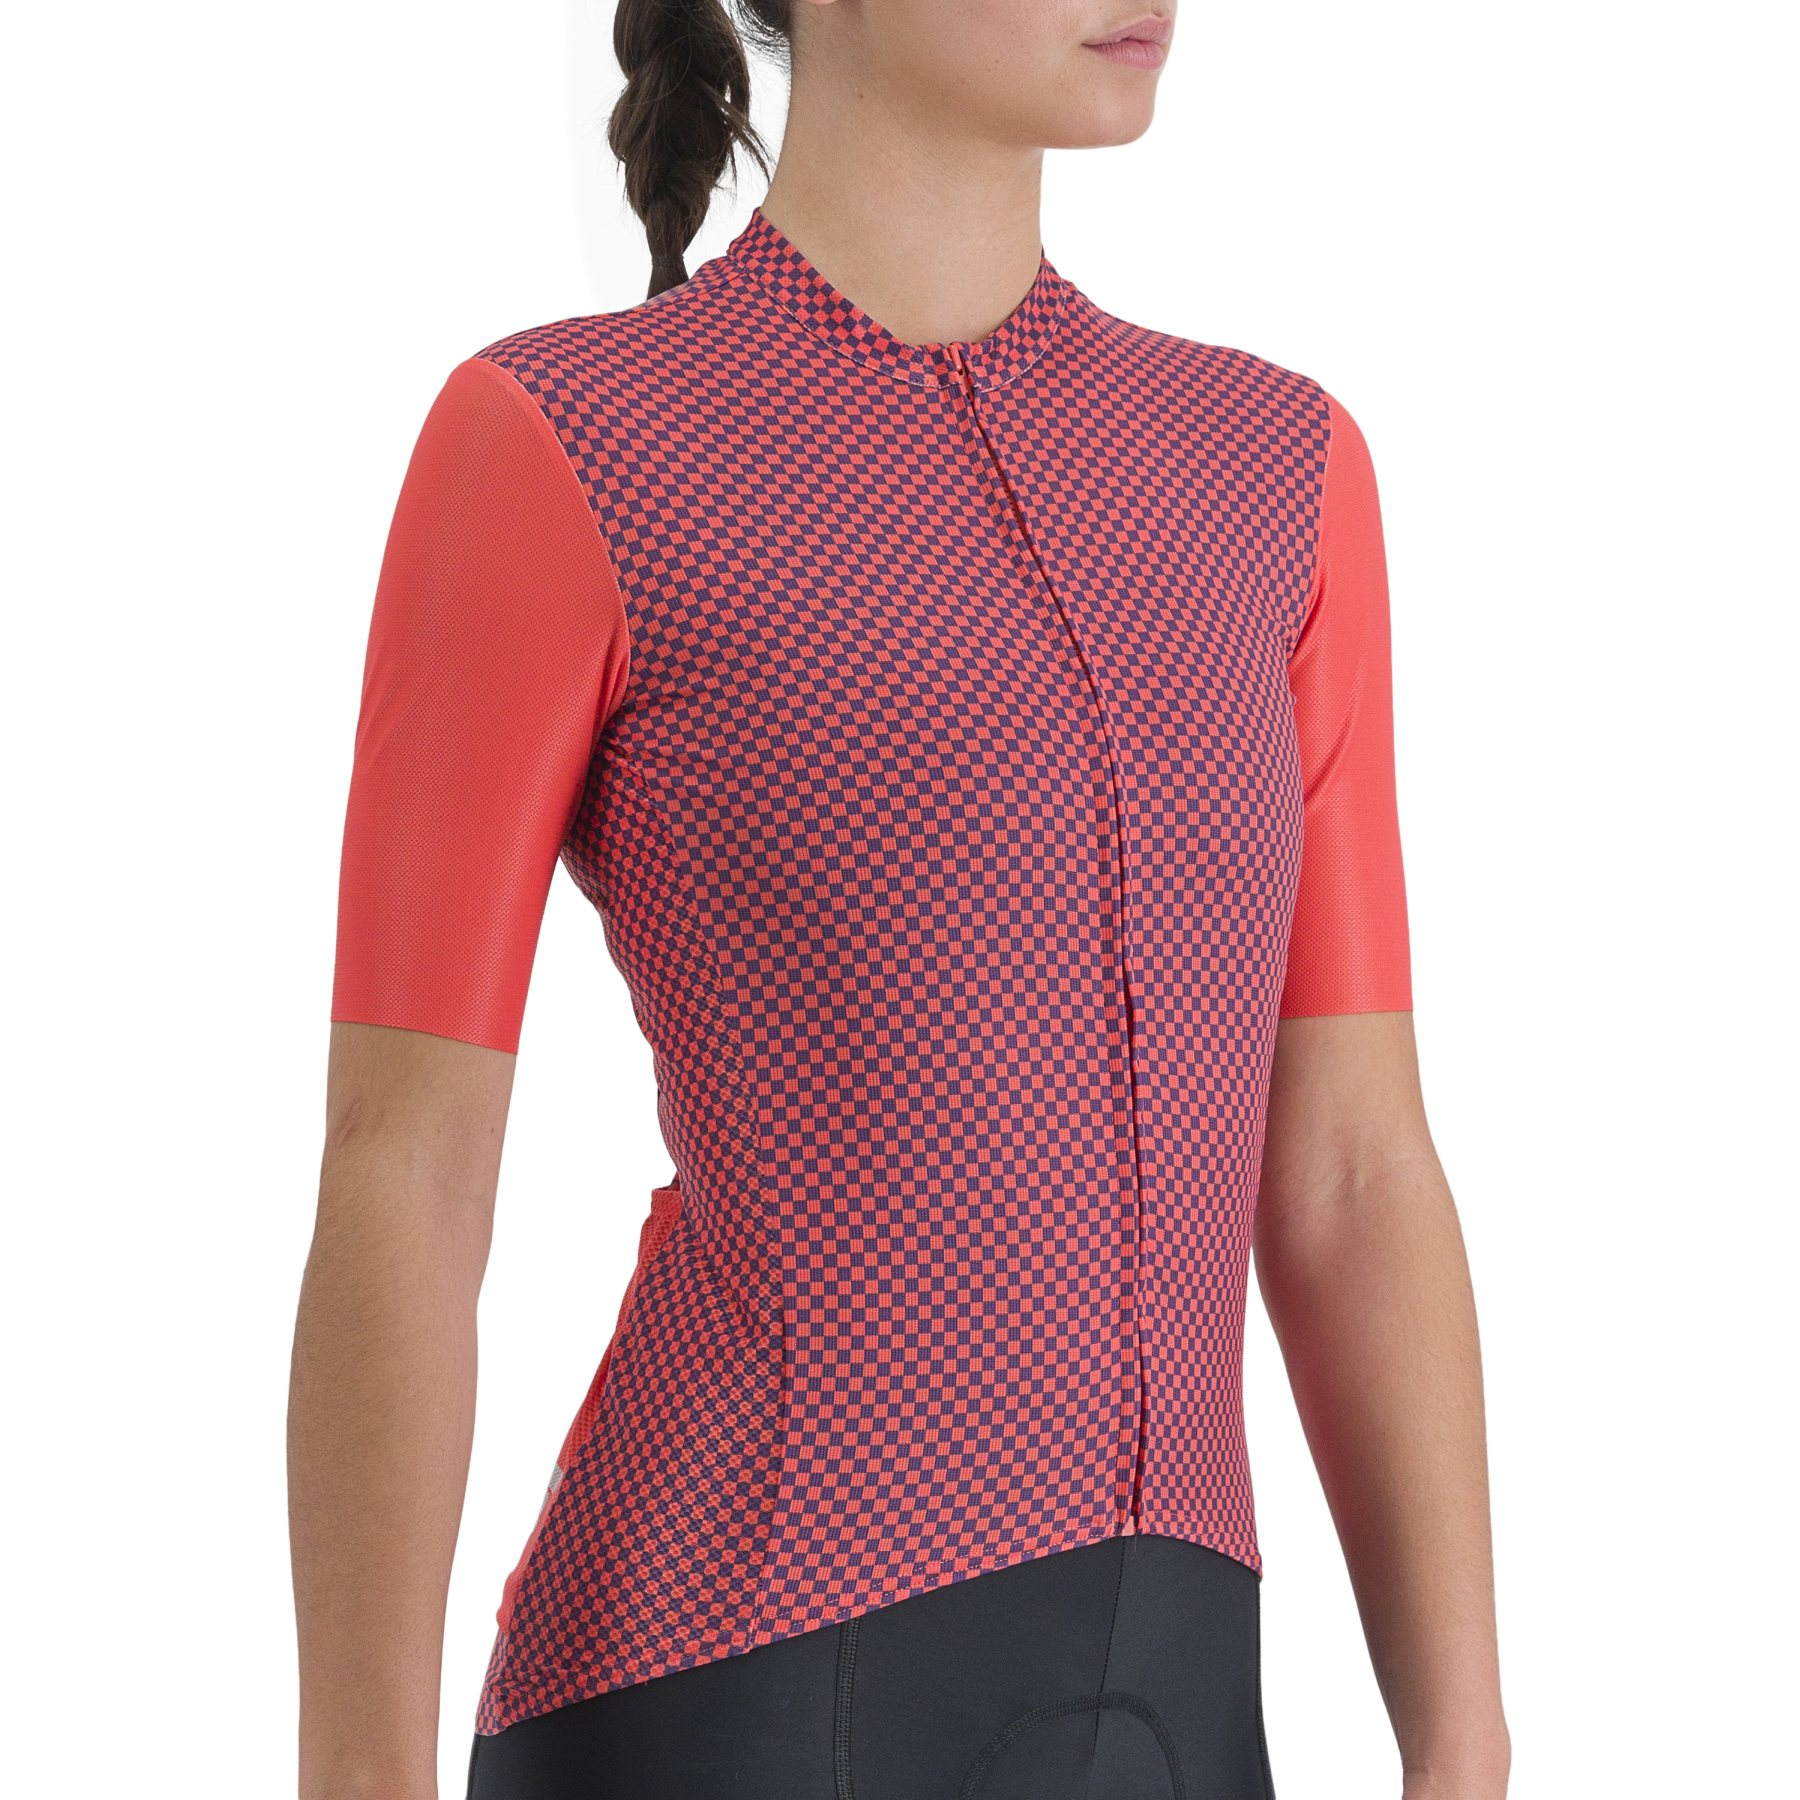 Picture of Sportful Checkmate Jersey Women - 117 Pompelmo Mulled Grape